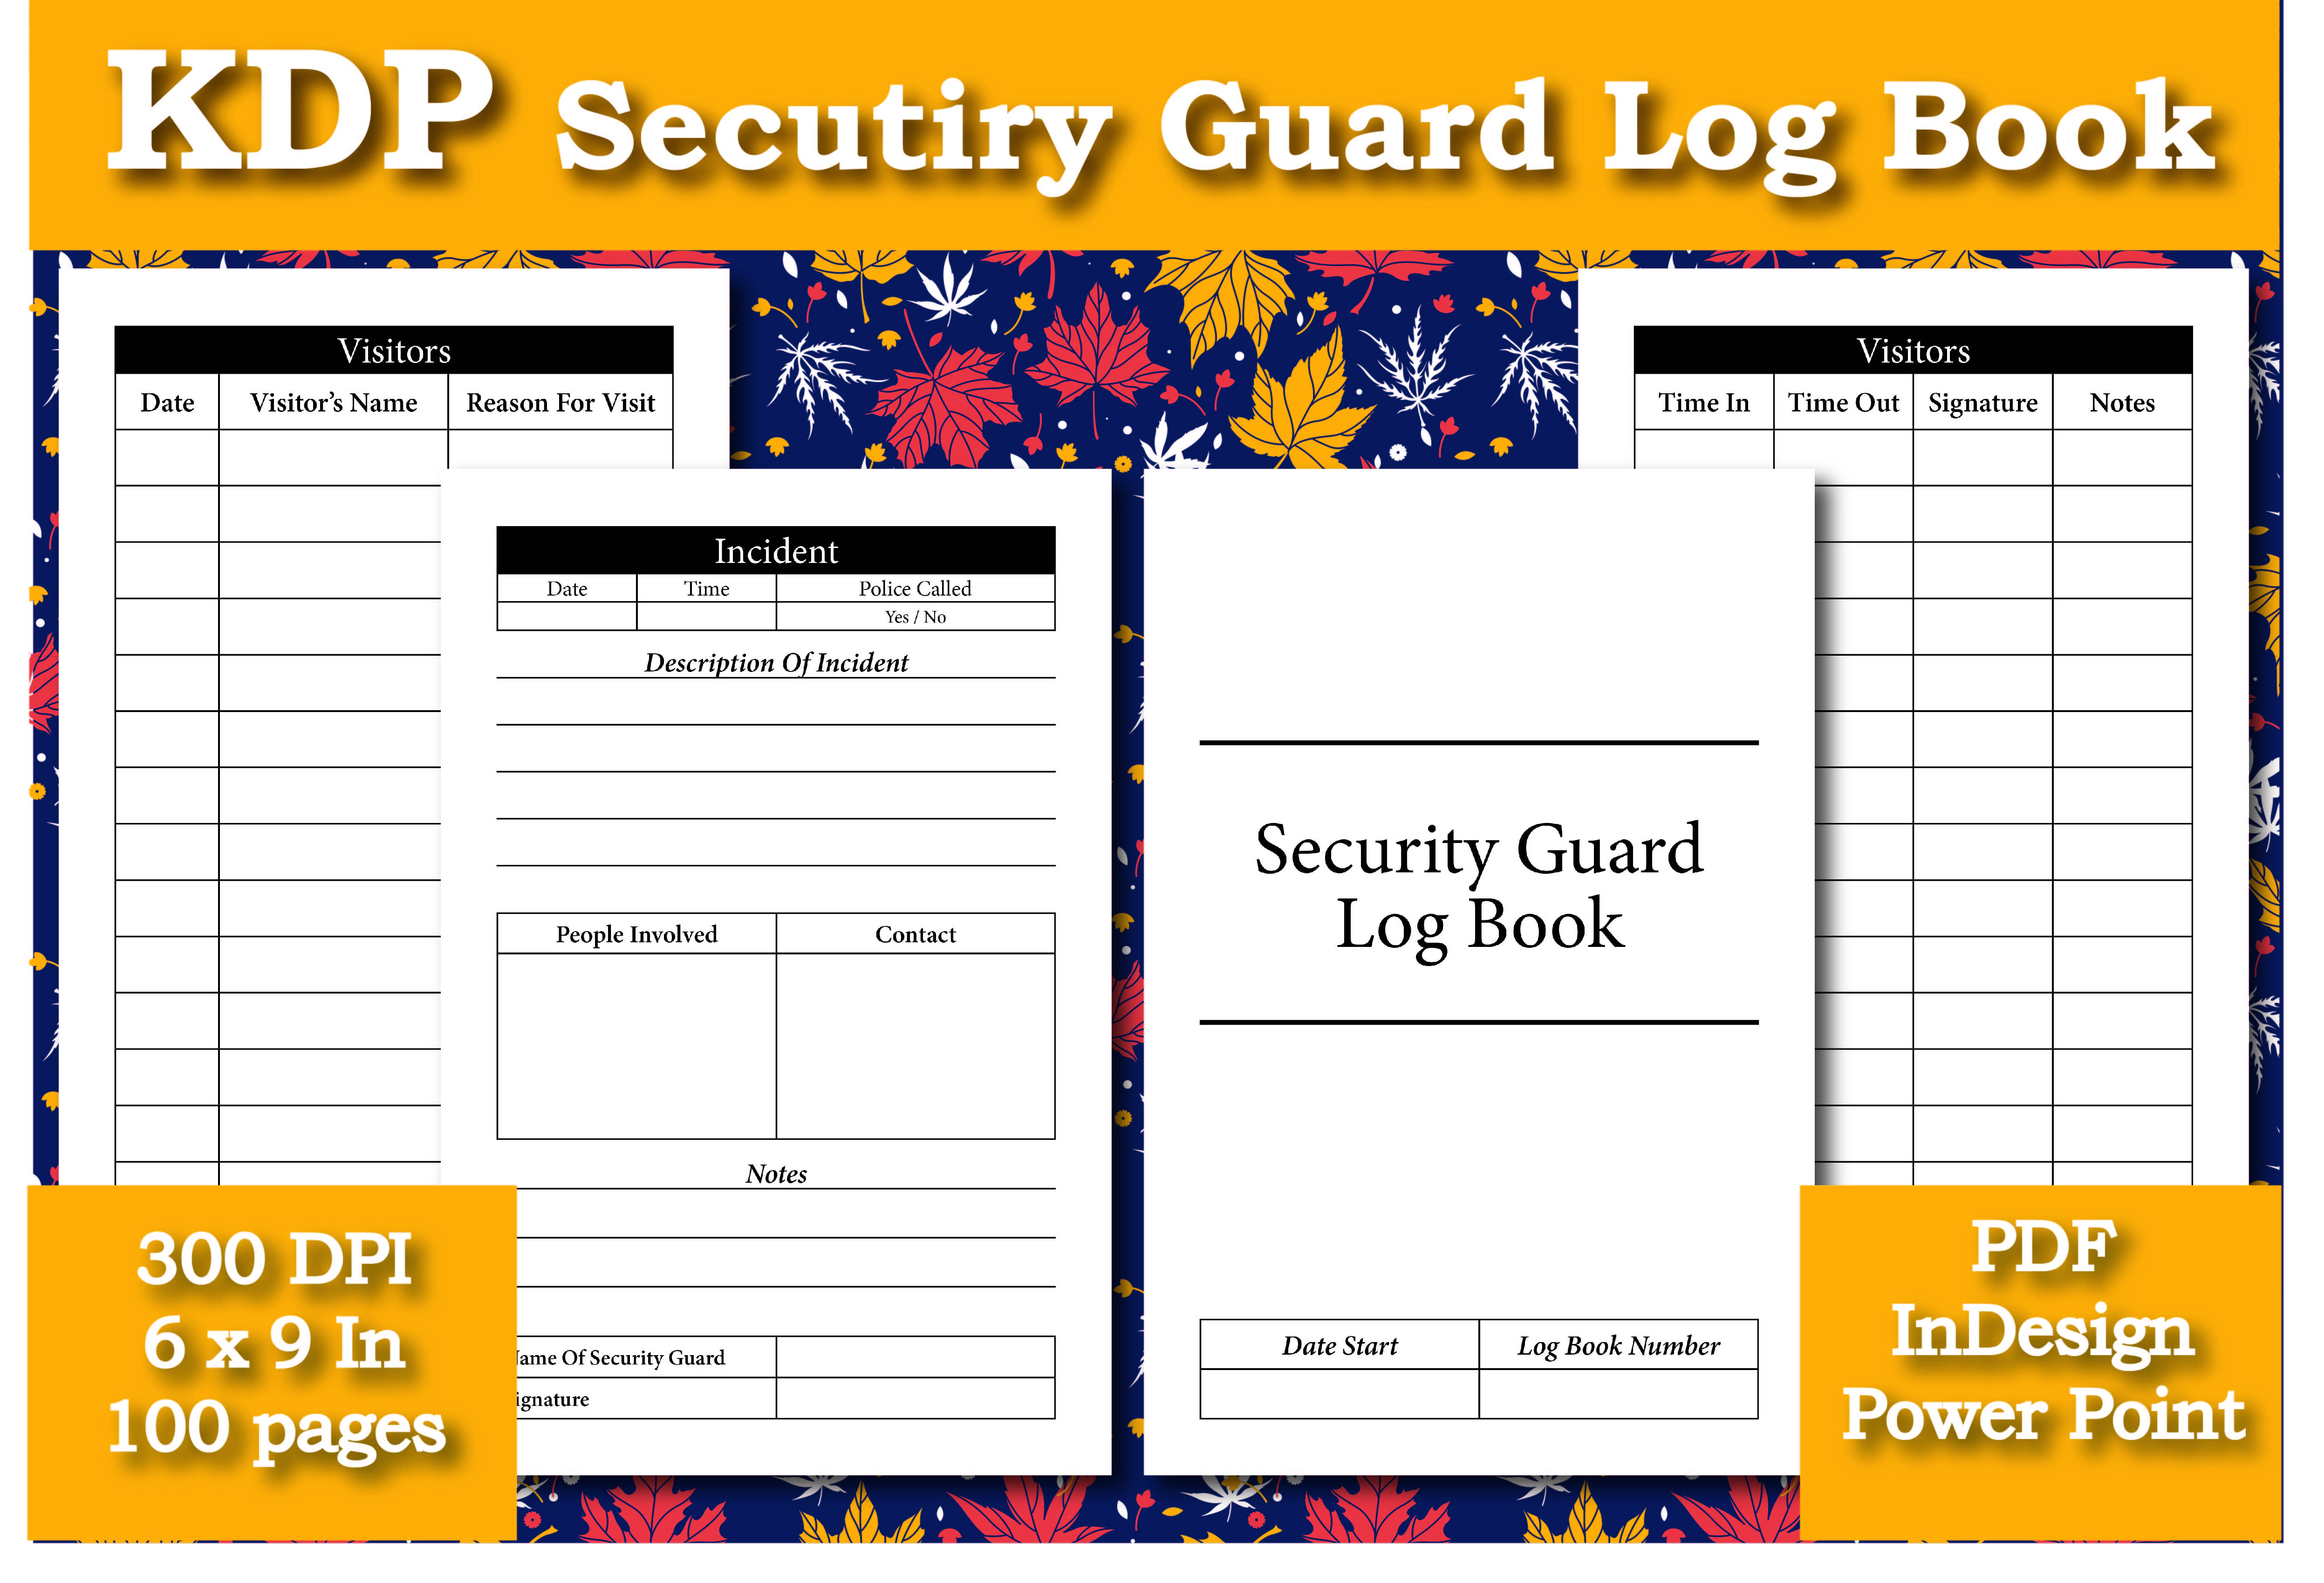 kdp-security-guard-log-book-interior-graphic-by-ivana-prue-creative